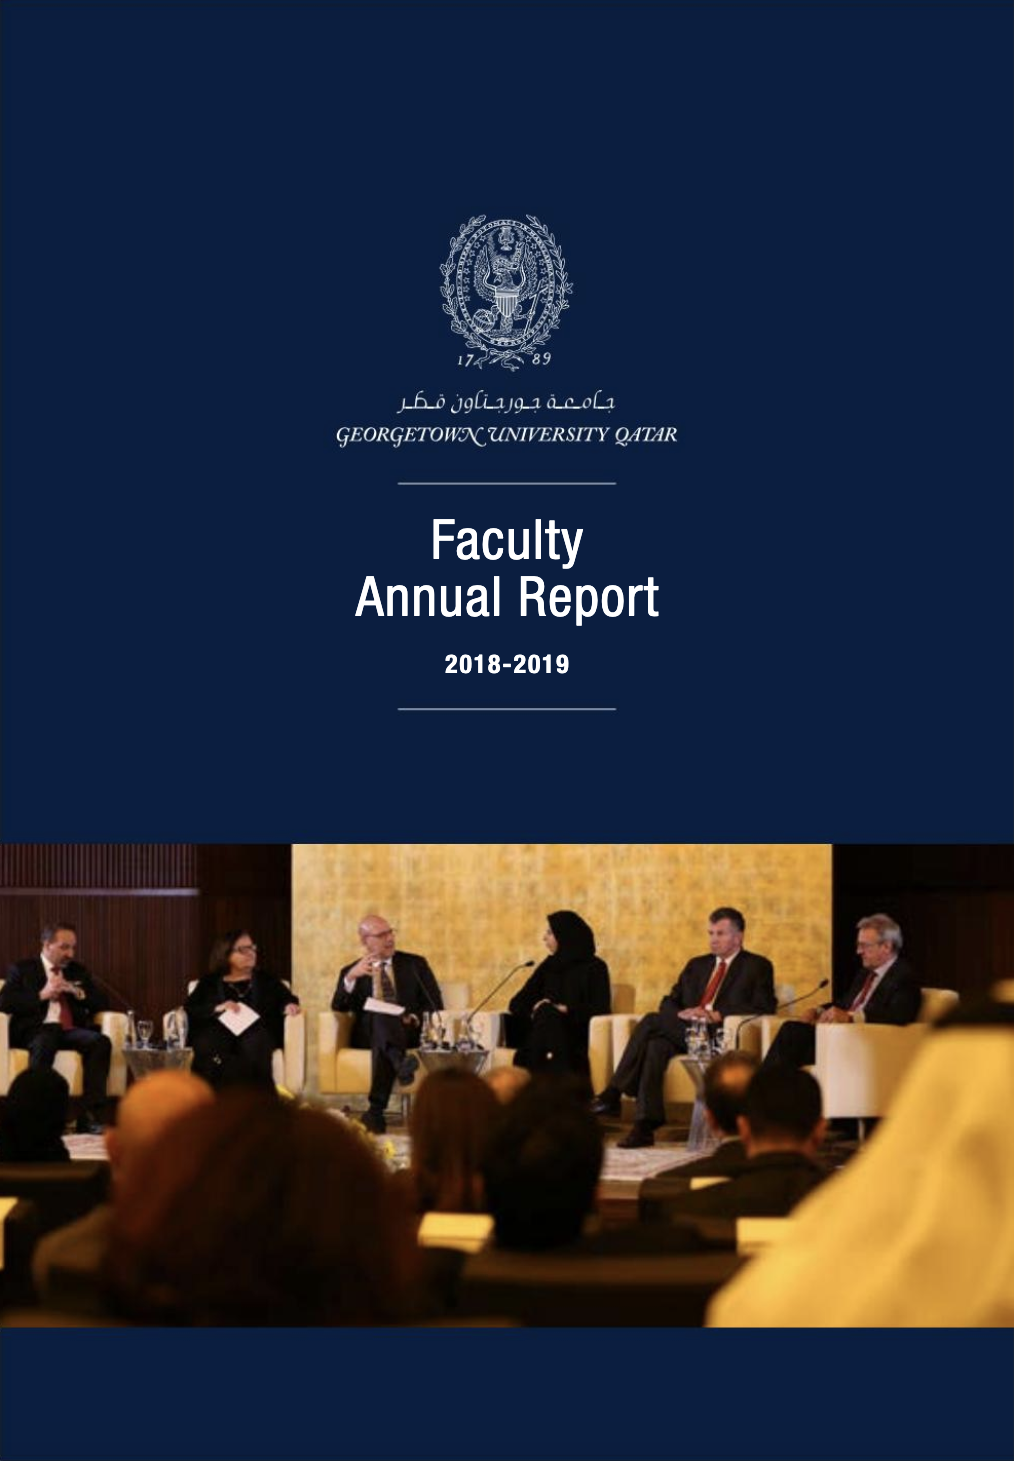 Faculty Annual Report 2018-2019